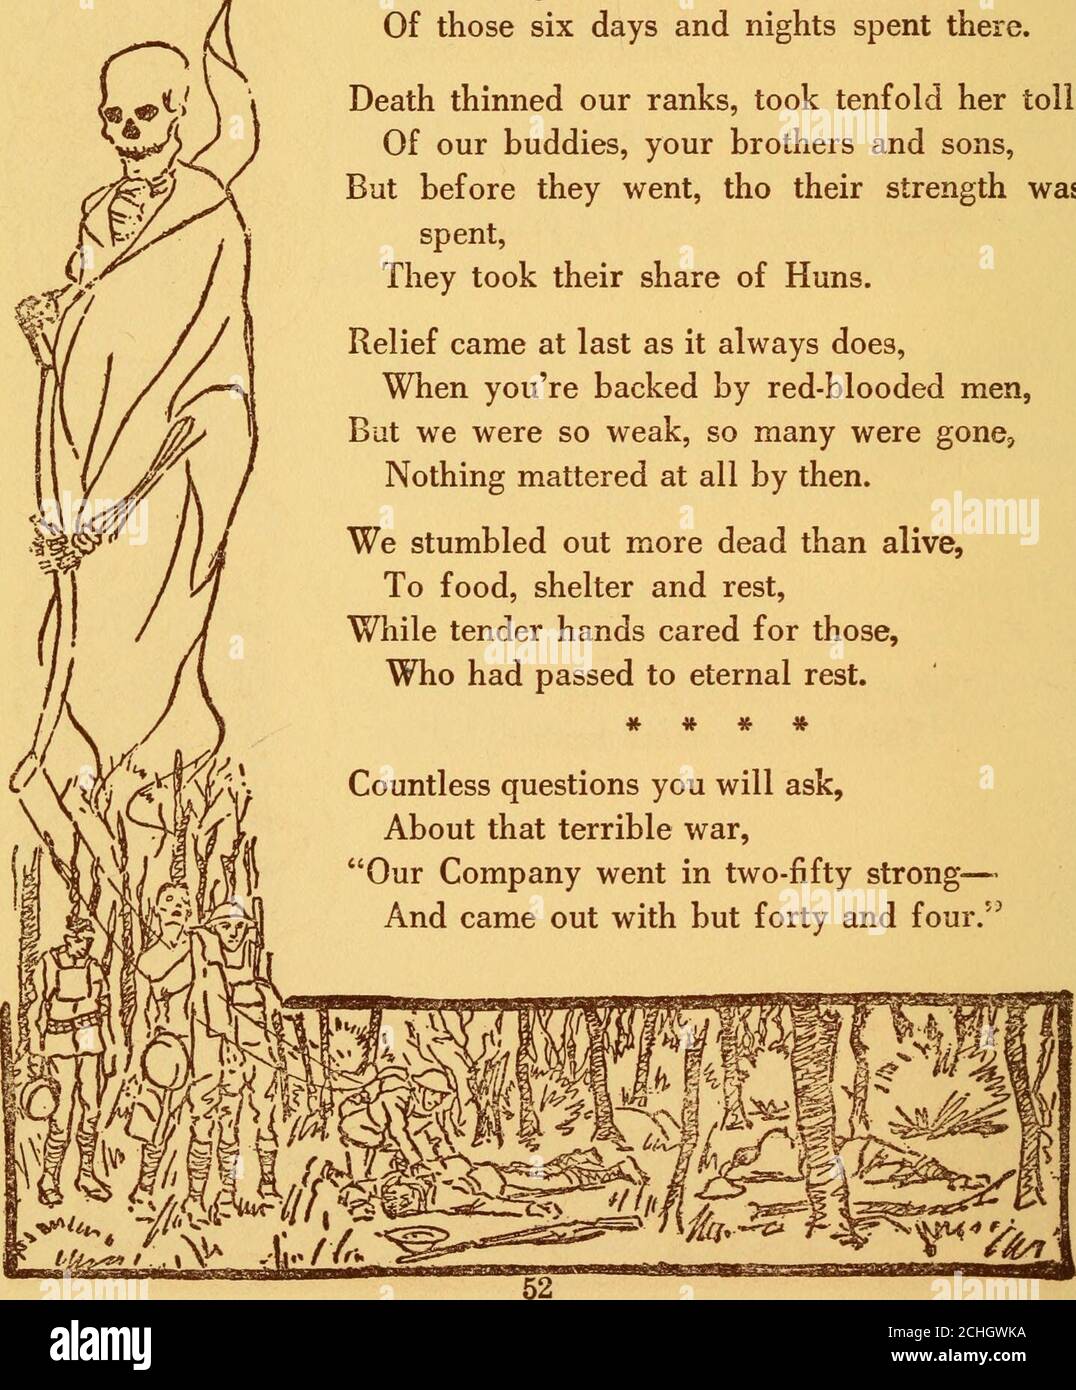 History and rhymes of the lost battalion . Rhymes of a Lost Battalion  Doughboy. Fighting all day, holding out by pure grit,And fighting at night  by the flare, The suffering we